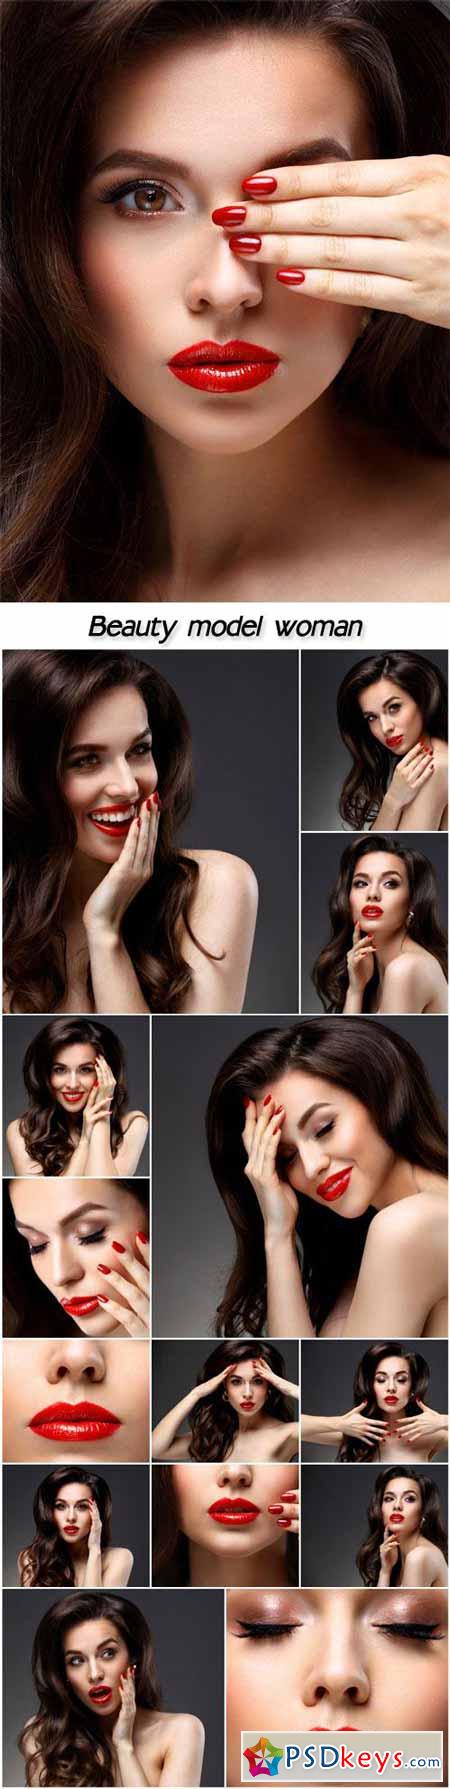 Beauty model woman with long hair, professional makeup